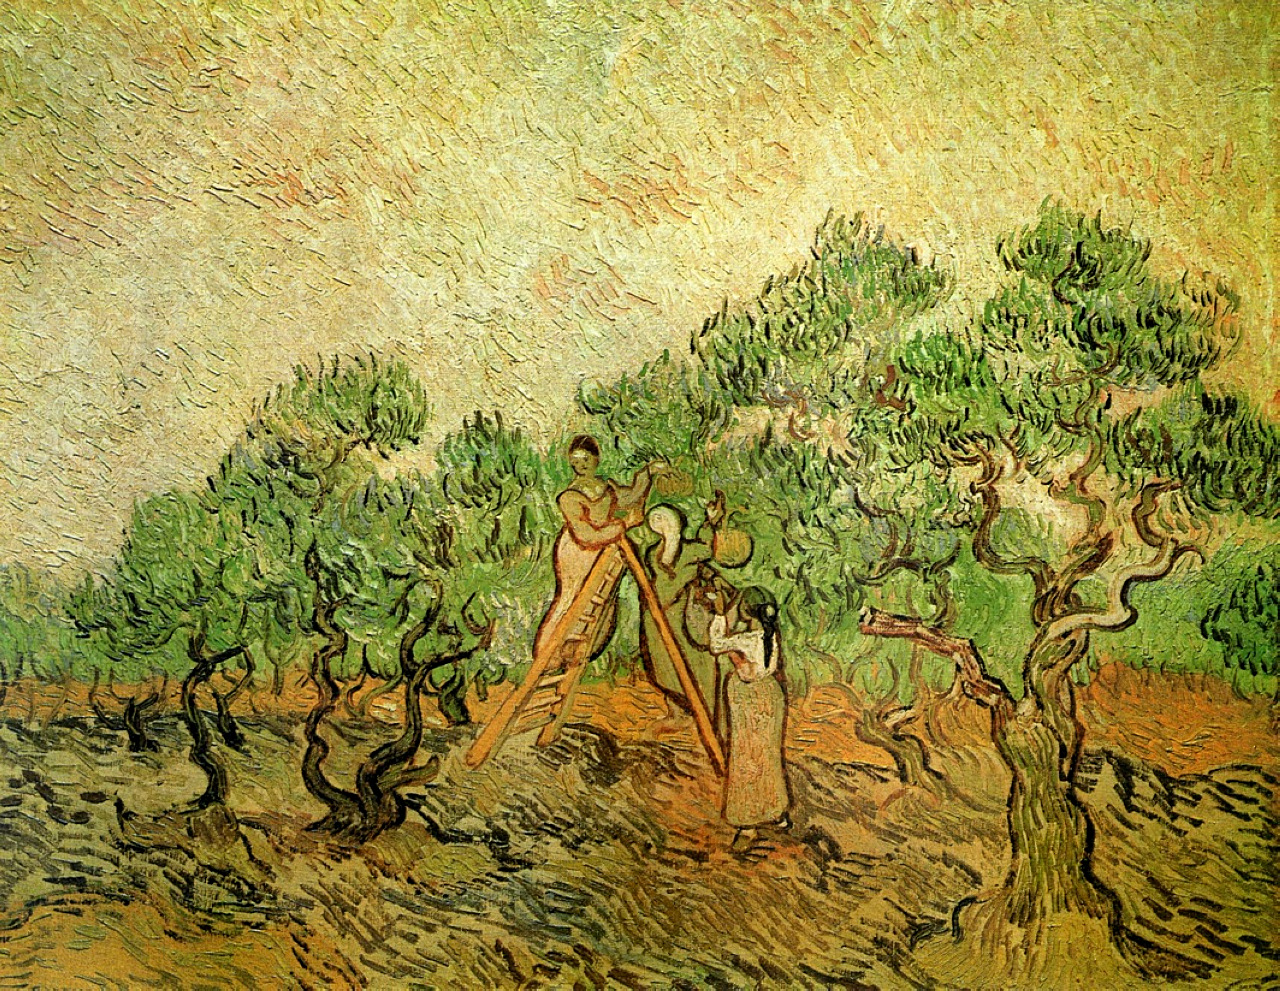 Olive Pickers by Vincent van Gogh - 1889 - 73 x 92 cm National Gallery of Art